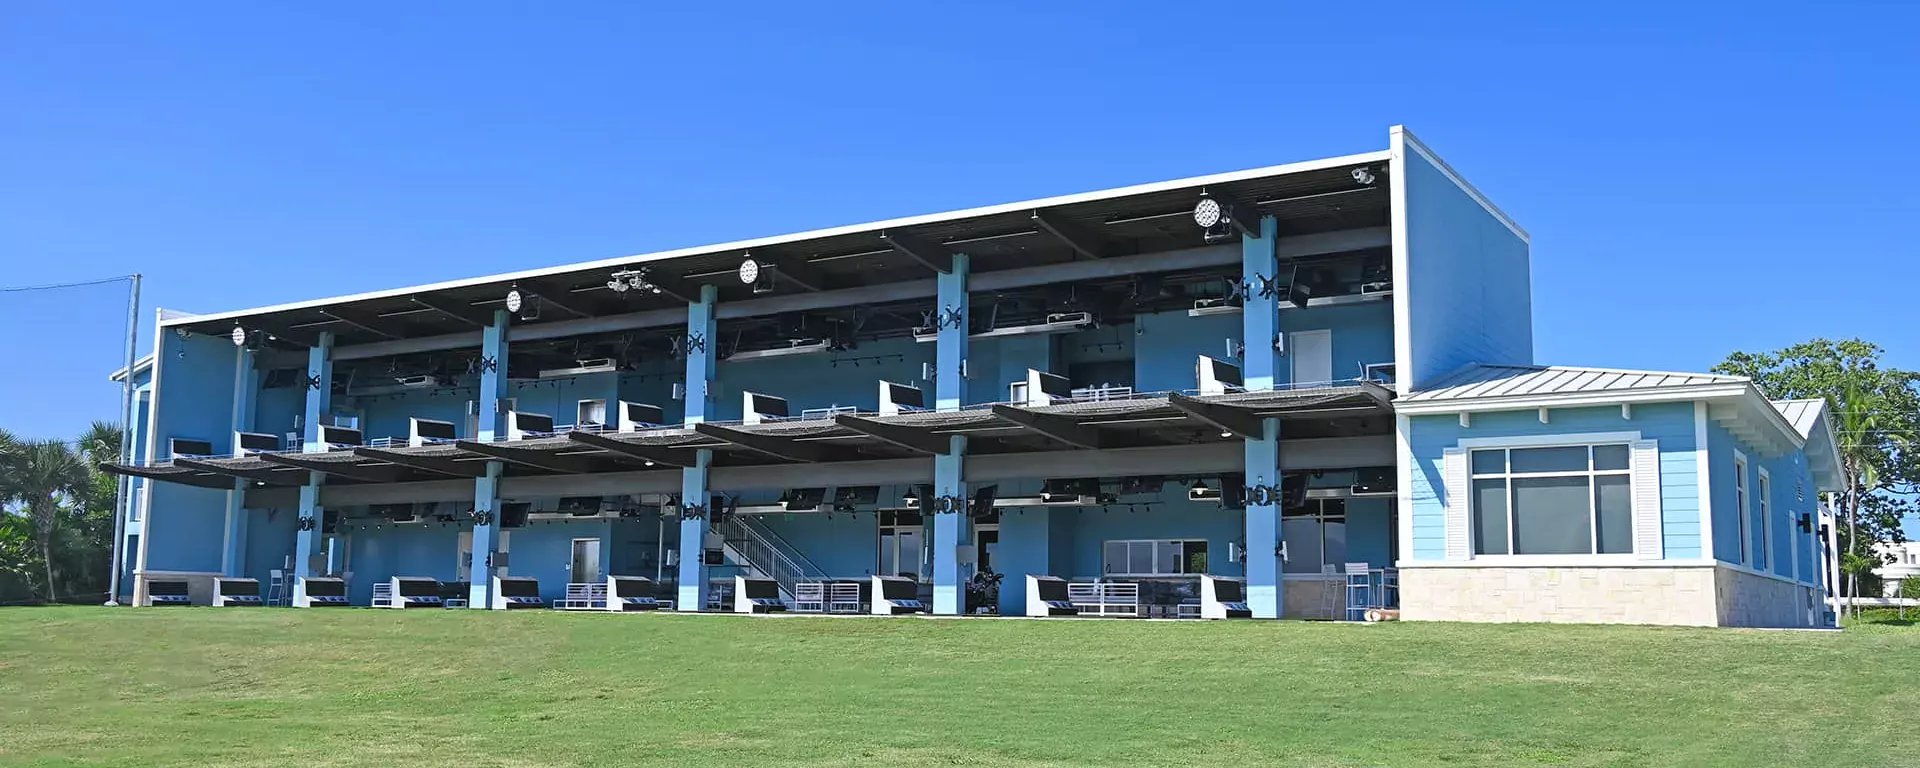 Image of the hitting bays at Sailfish Sands Golf Course